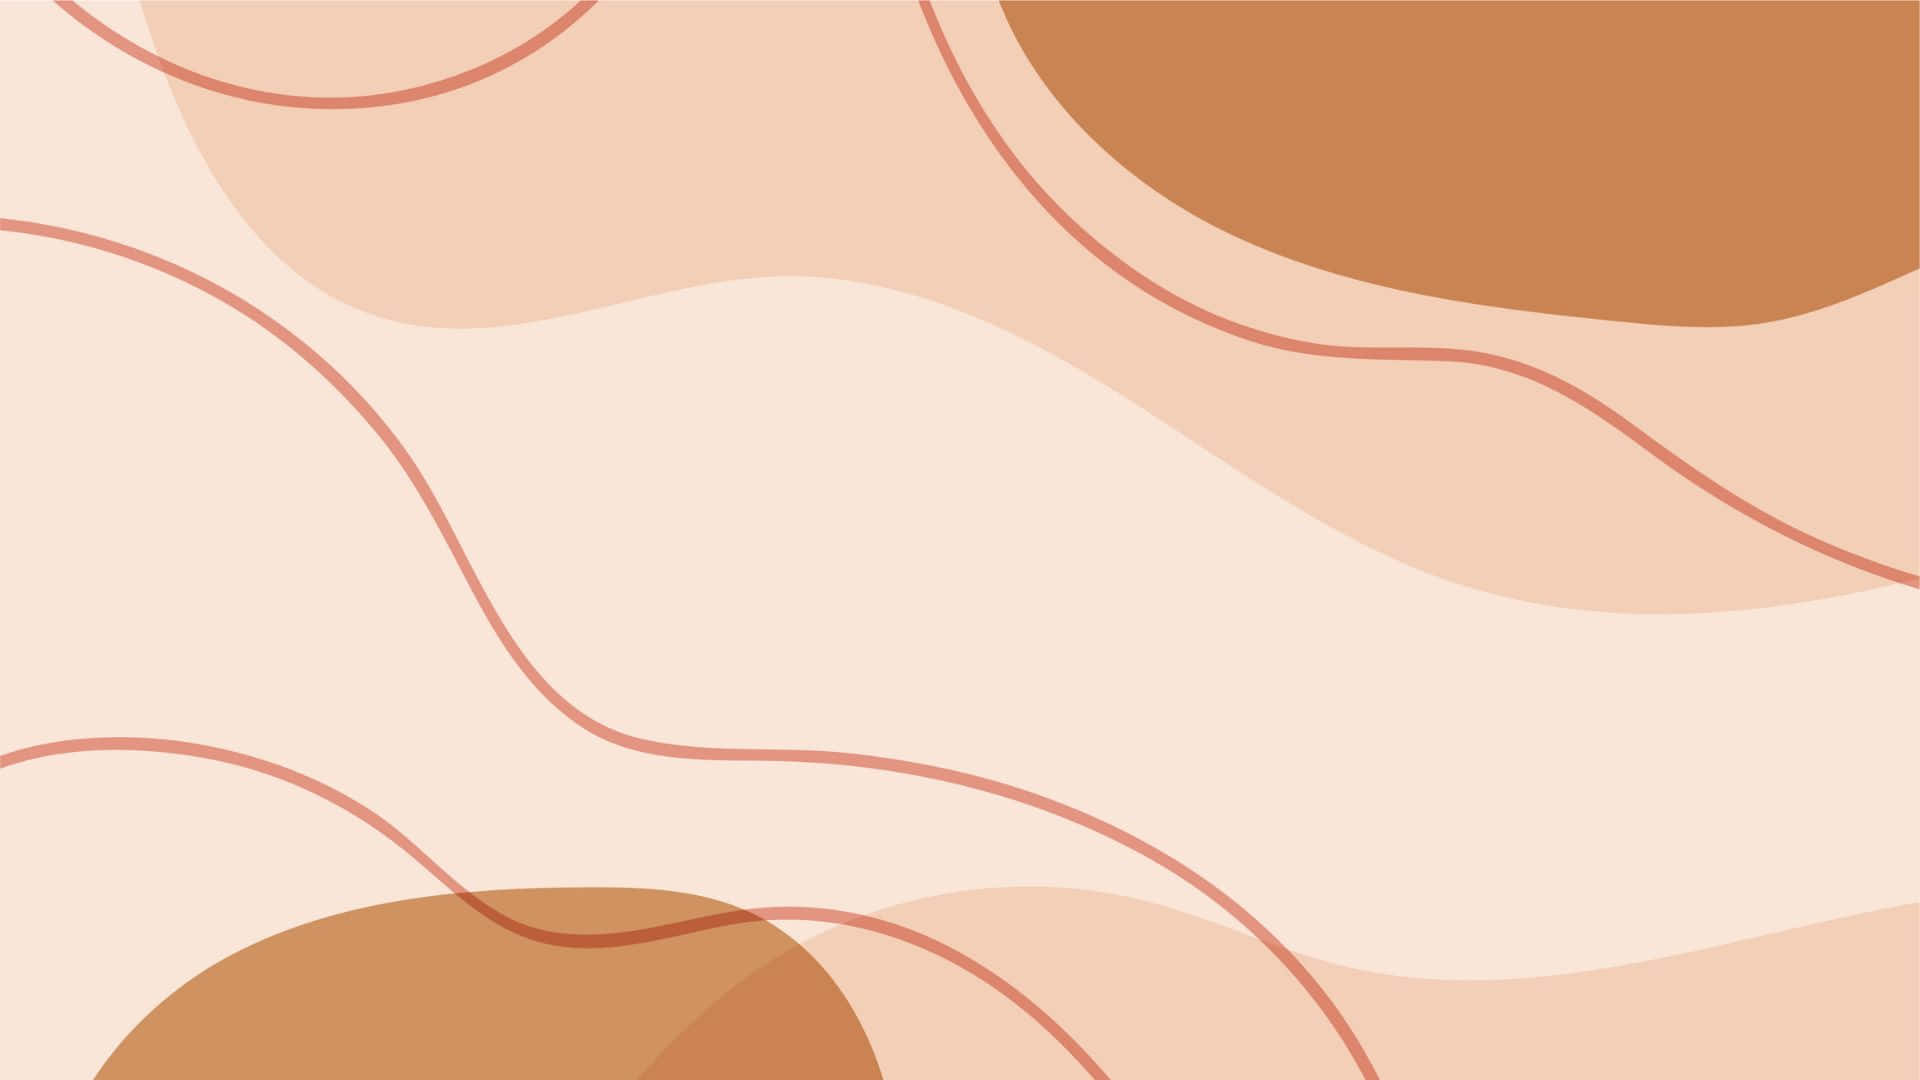 An abstract image with beige and brown curves - Terracotta, pastel, vector